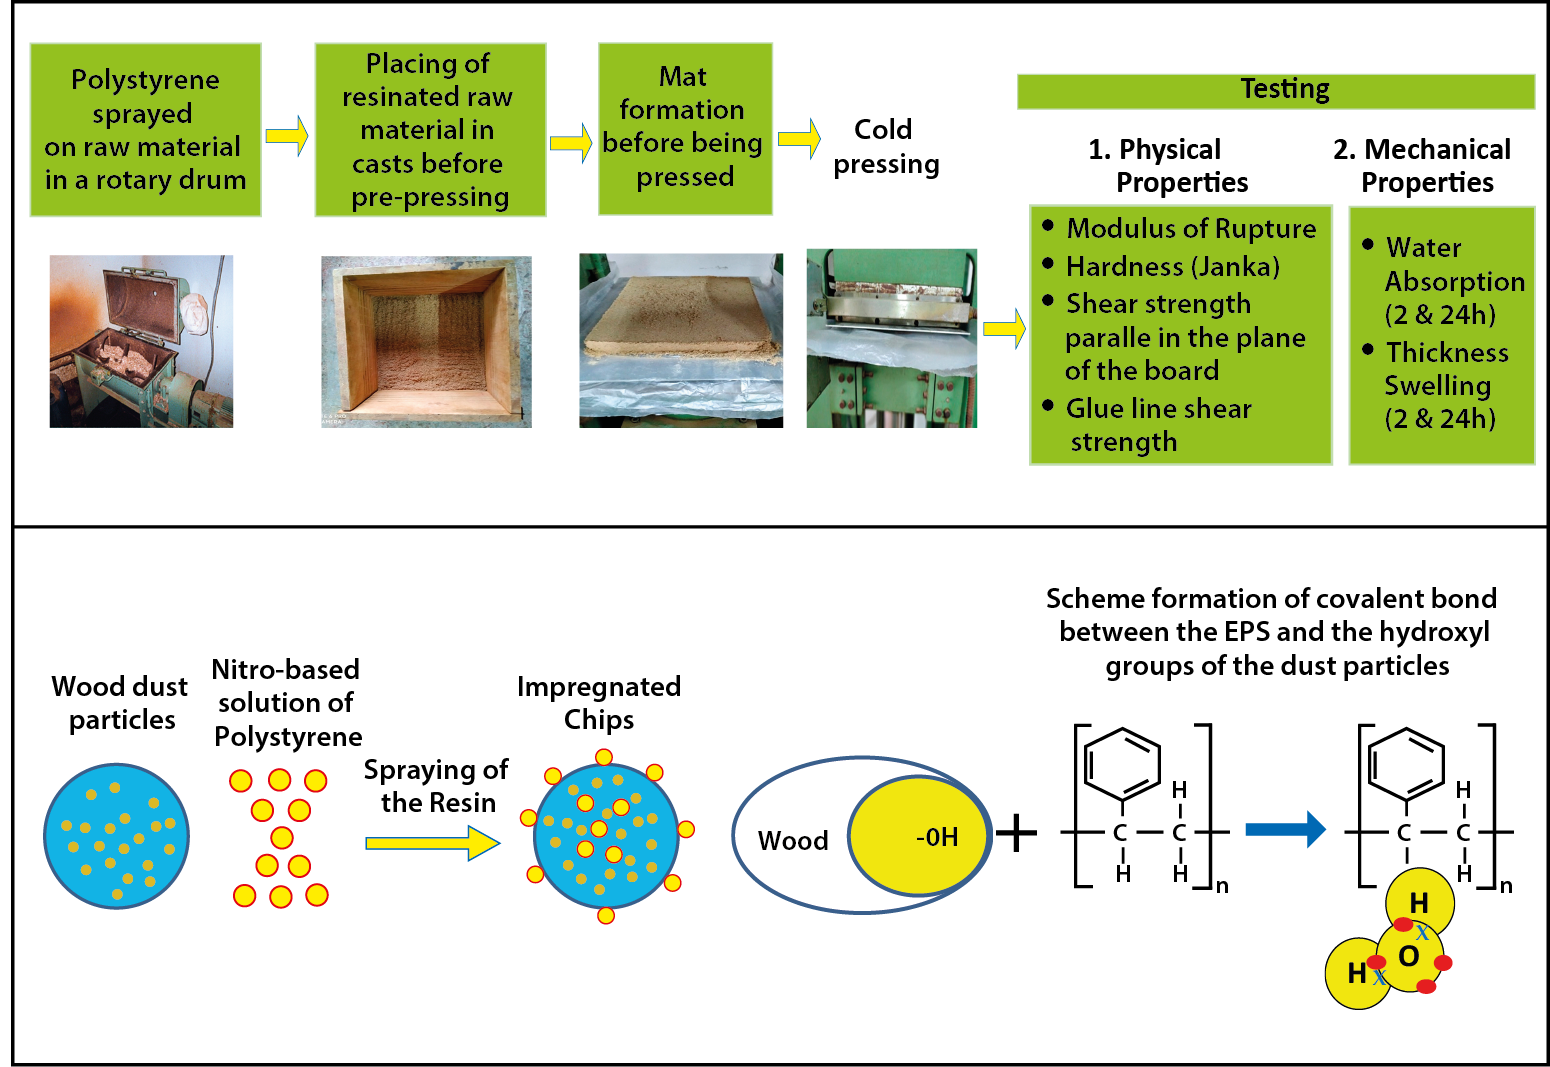 Physical and Mechanical Properties of Eco-Friendly Composites Made from Wood Dust and Recycled Polystyrene